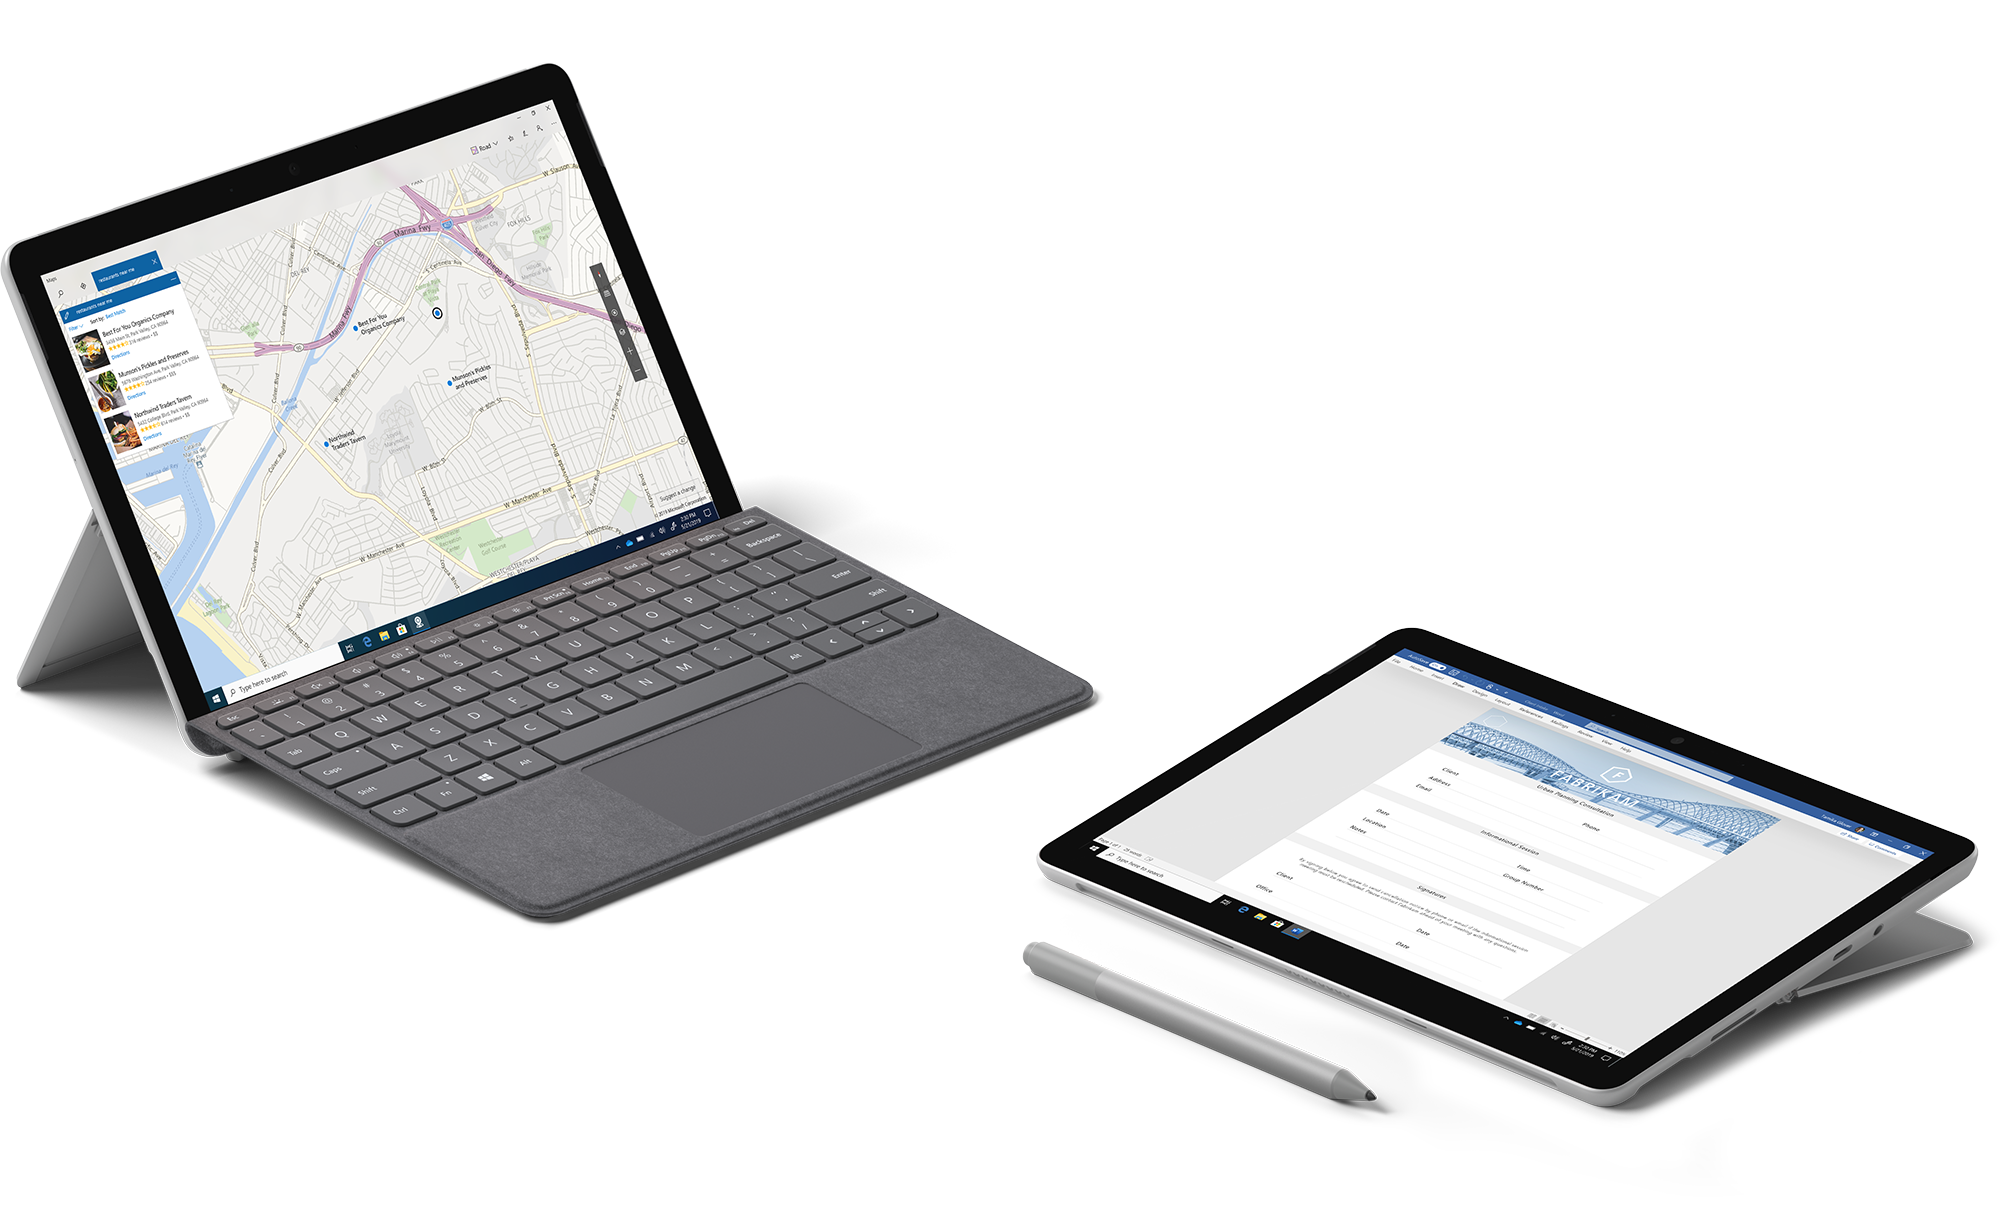 Microsoft Surface laptop and tablet